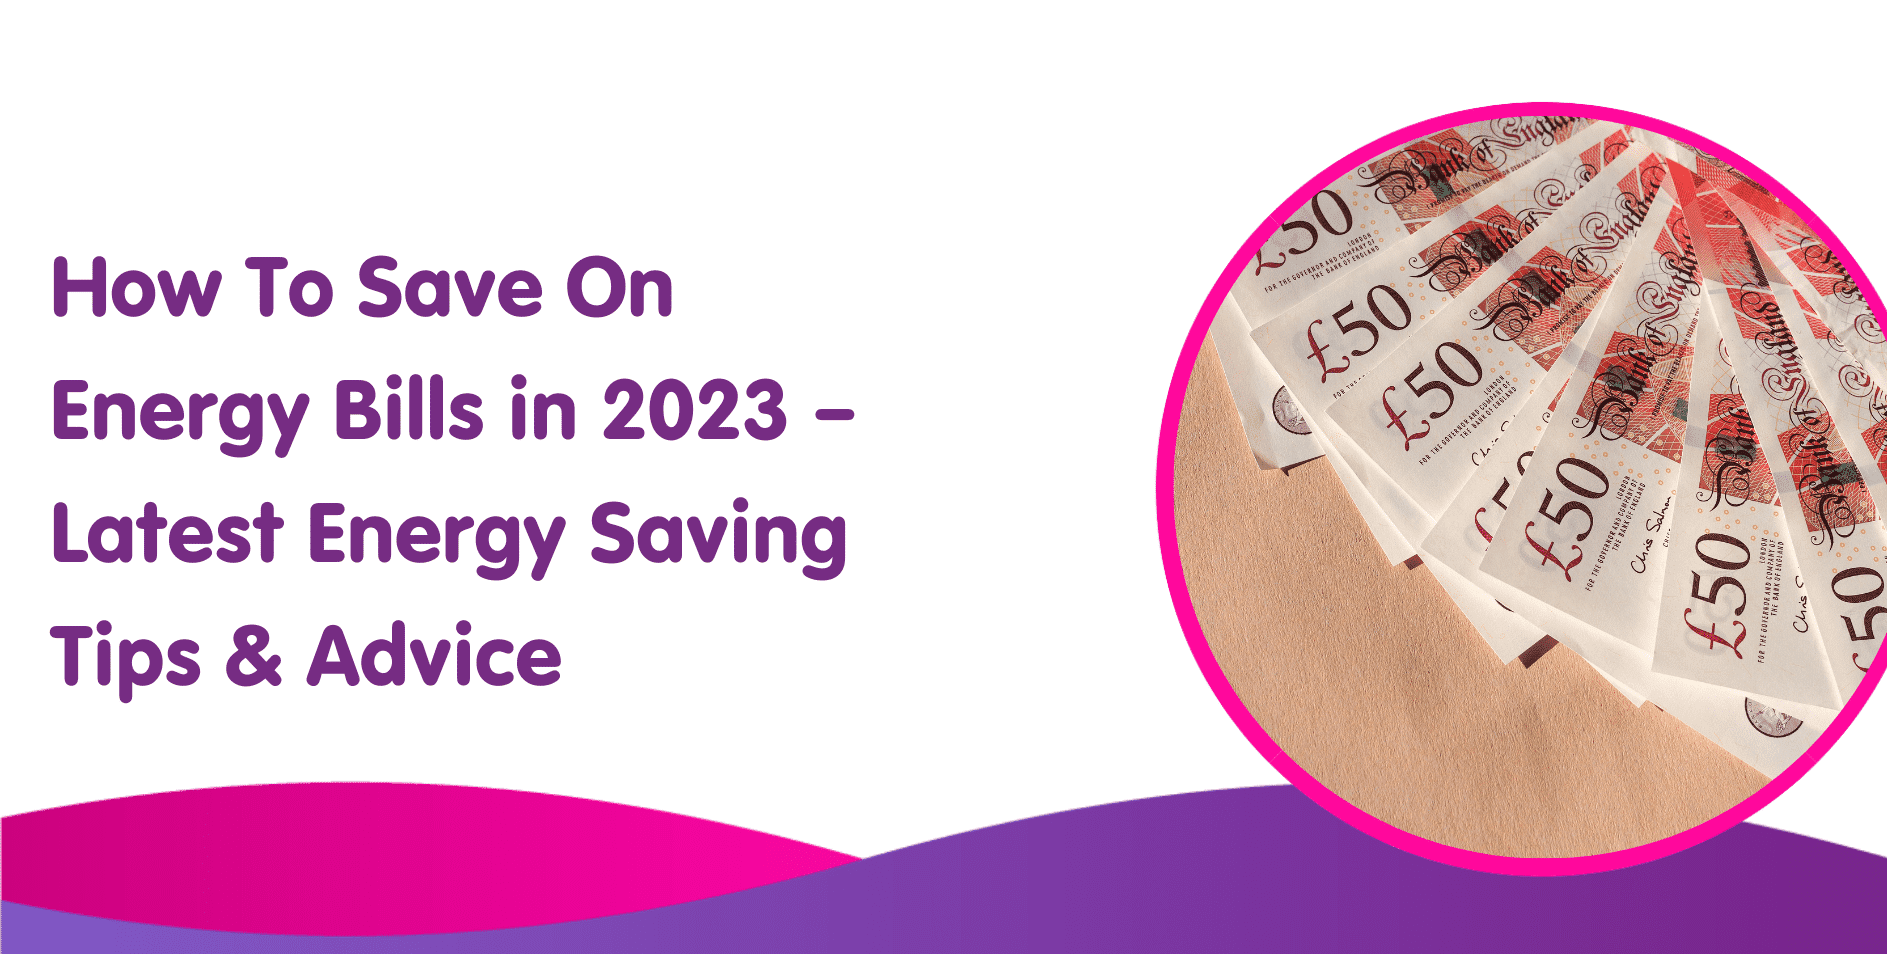 How To Save On Energy Bills in 2023 – Latest Energy Saving Tips & Advice